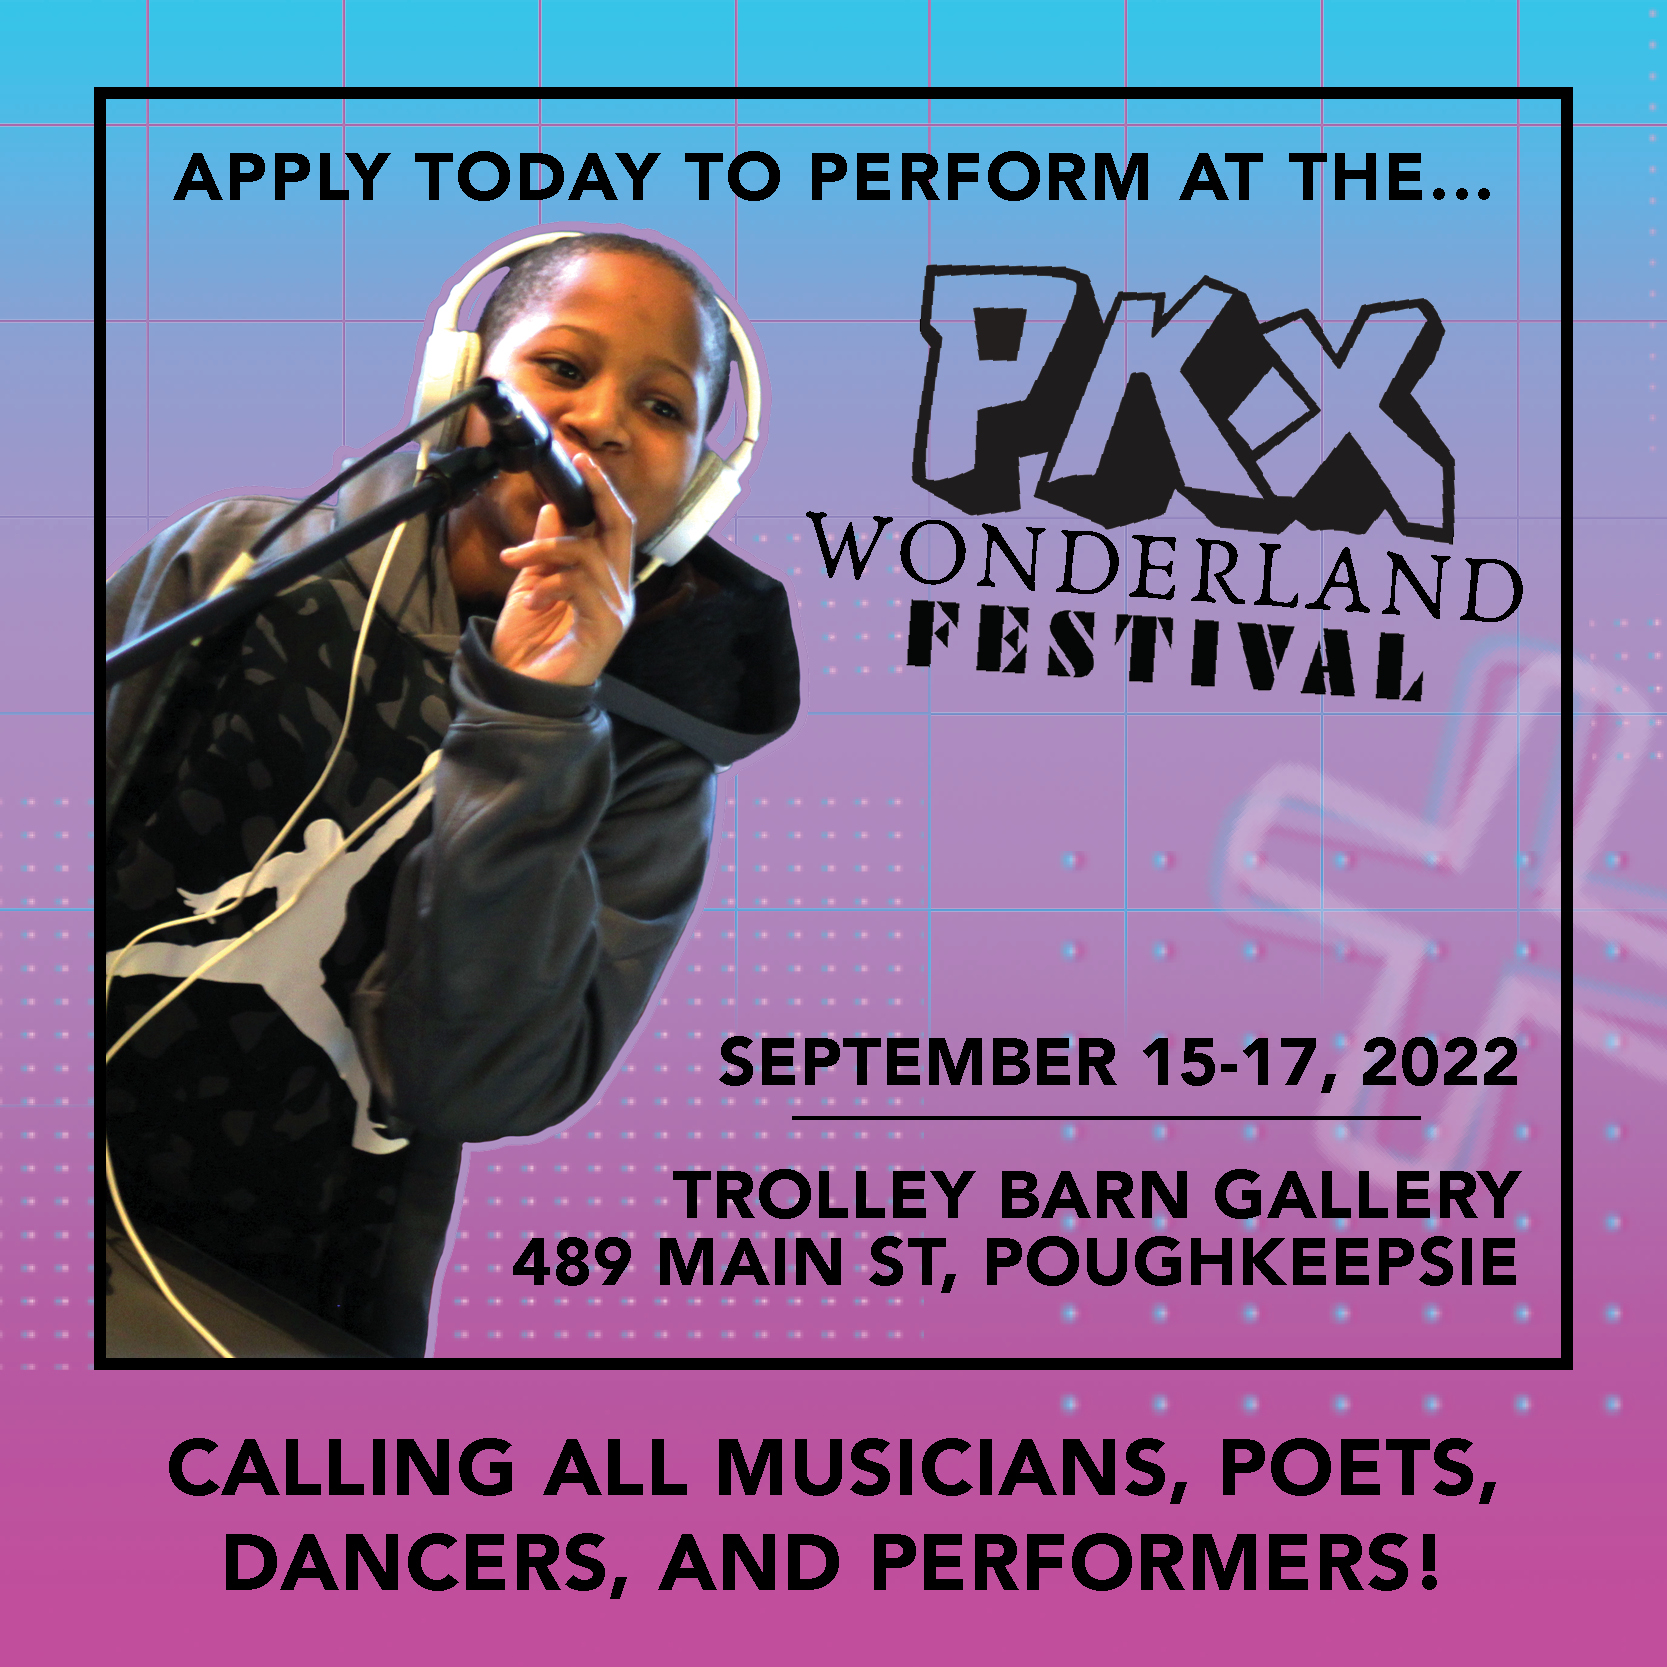 PKX Call For Performing Artists - The Art Effect